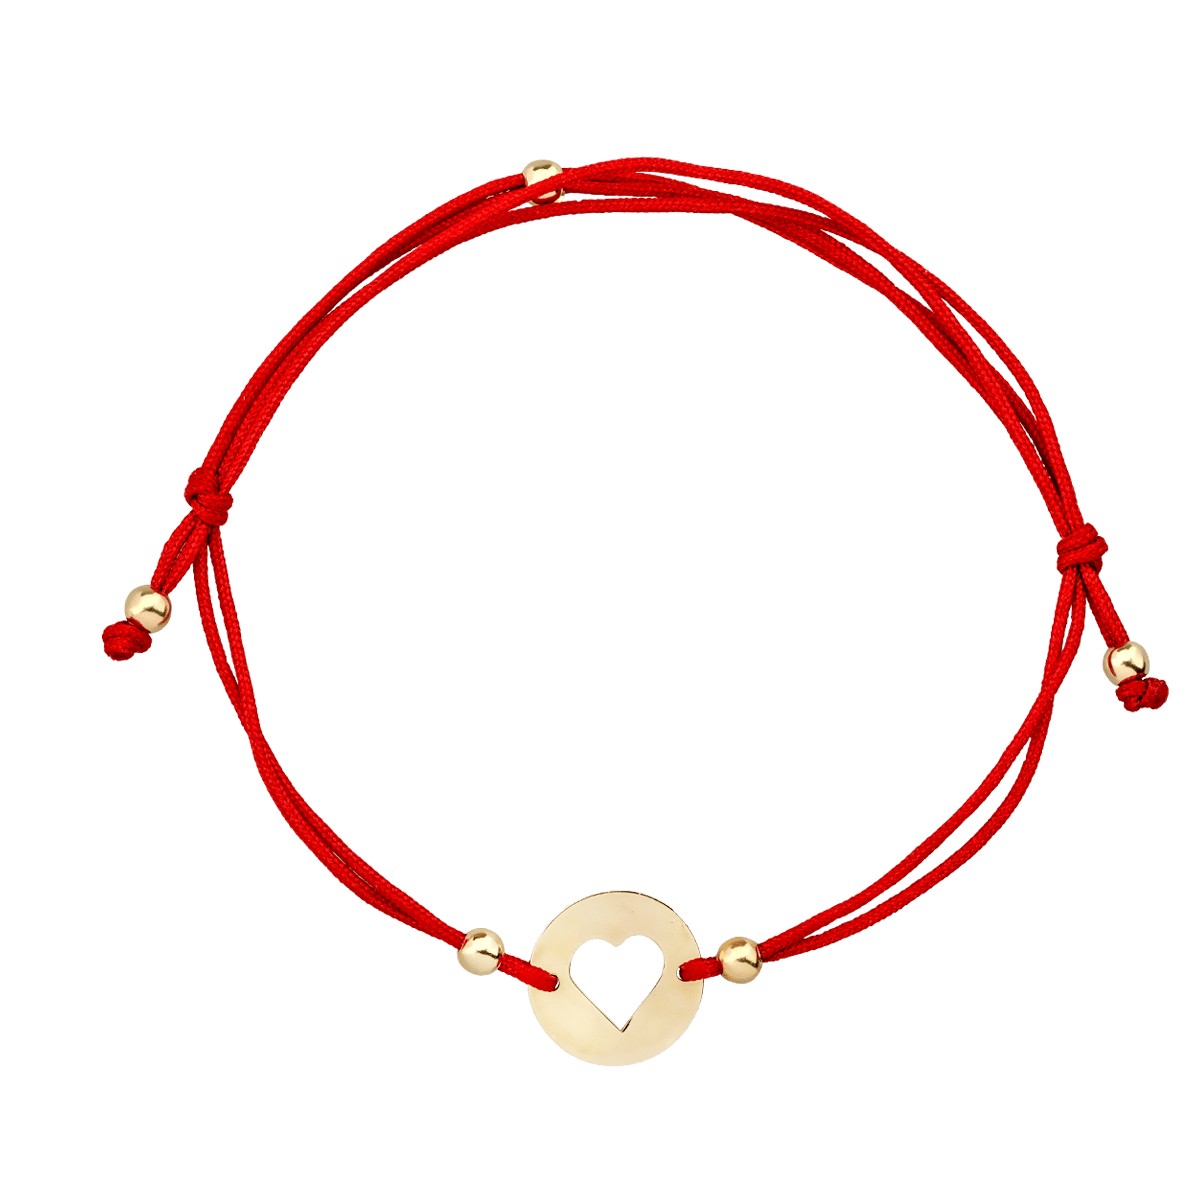 Red cord children's bracelet with 14K yellow gold heart coin